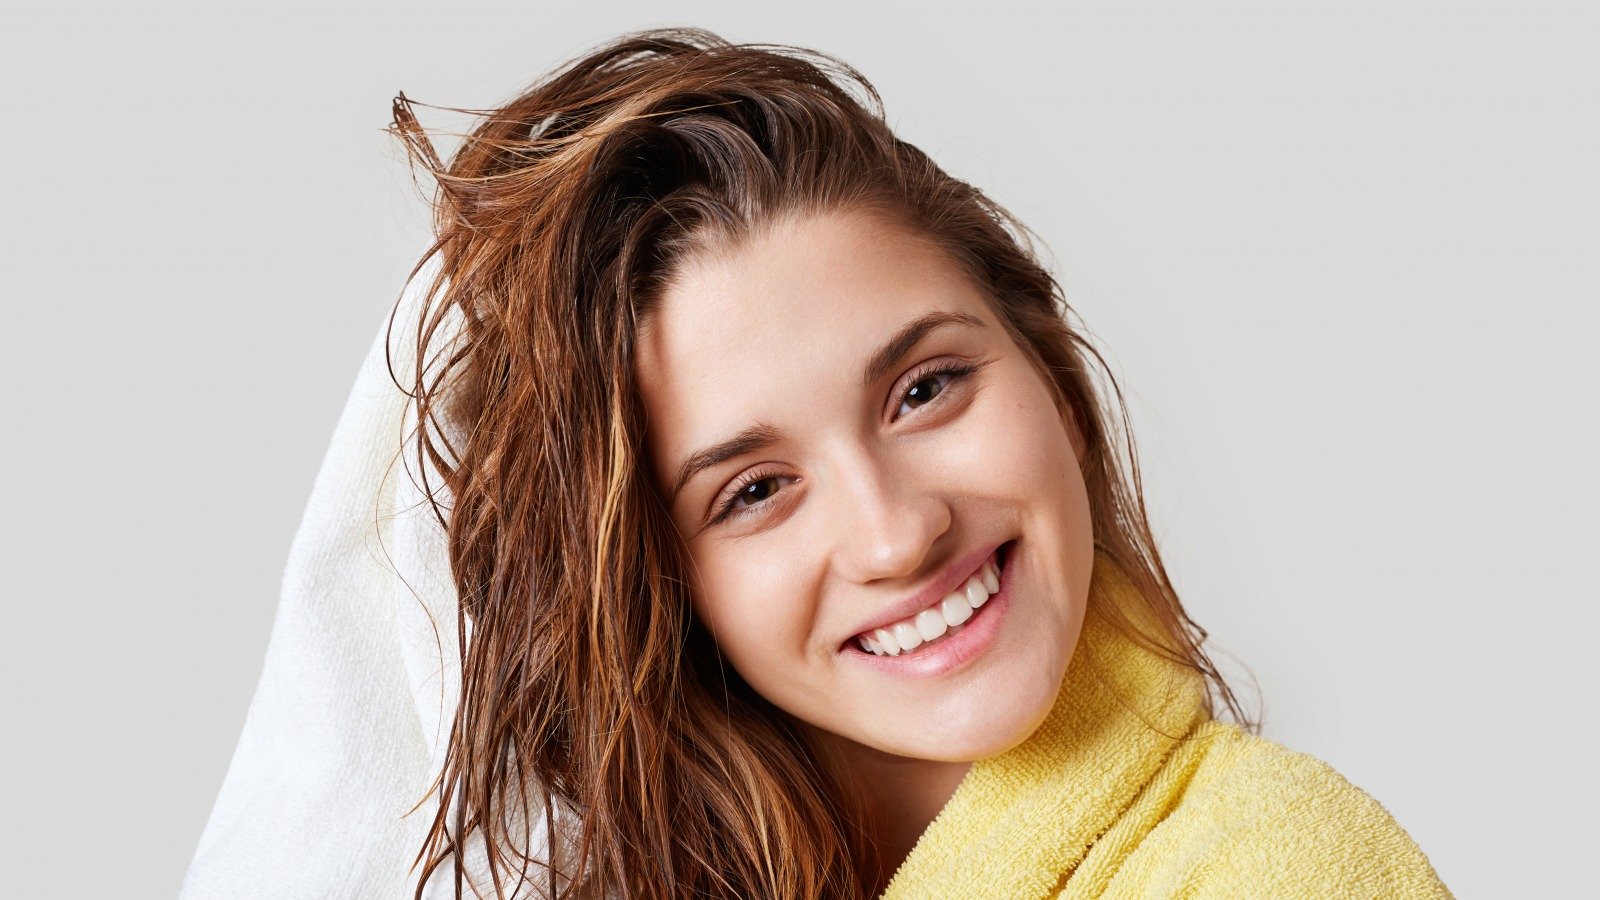 Never Go Out In The Cold With Wet Hair. Here's Why